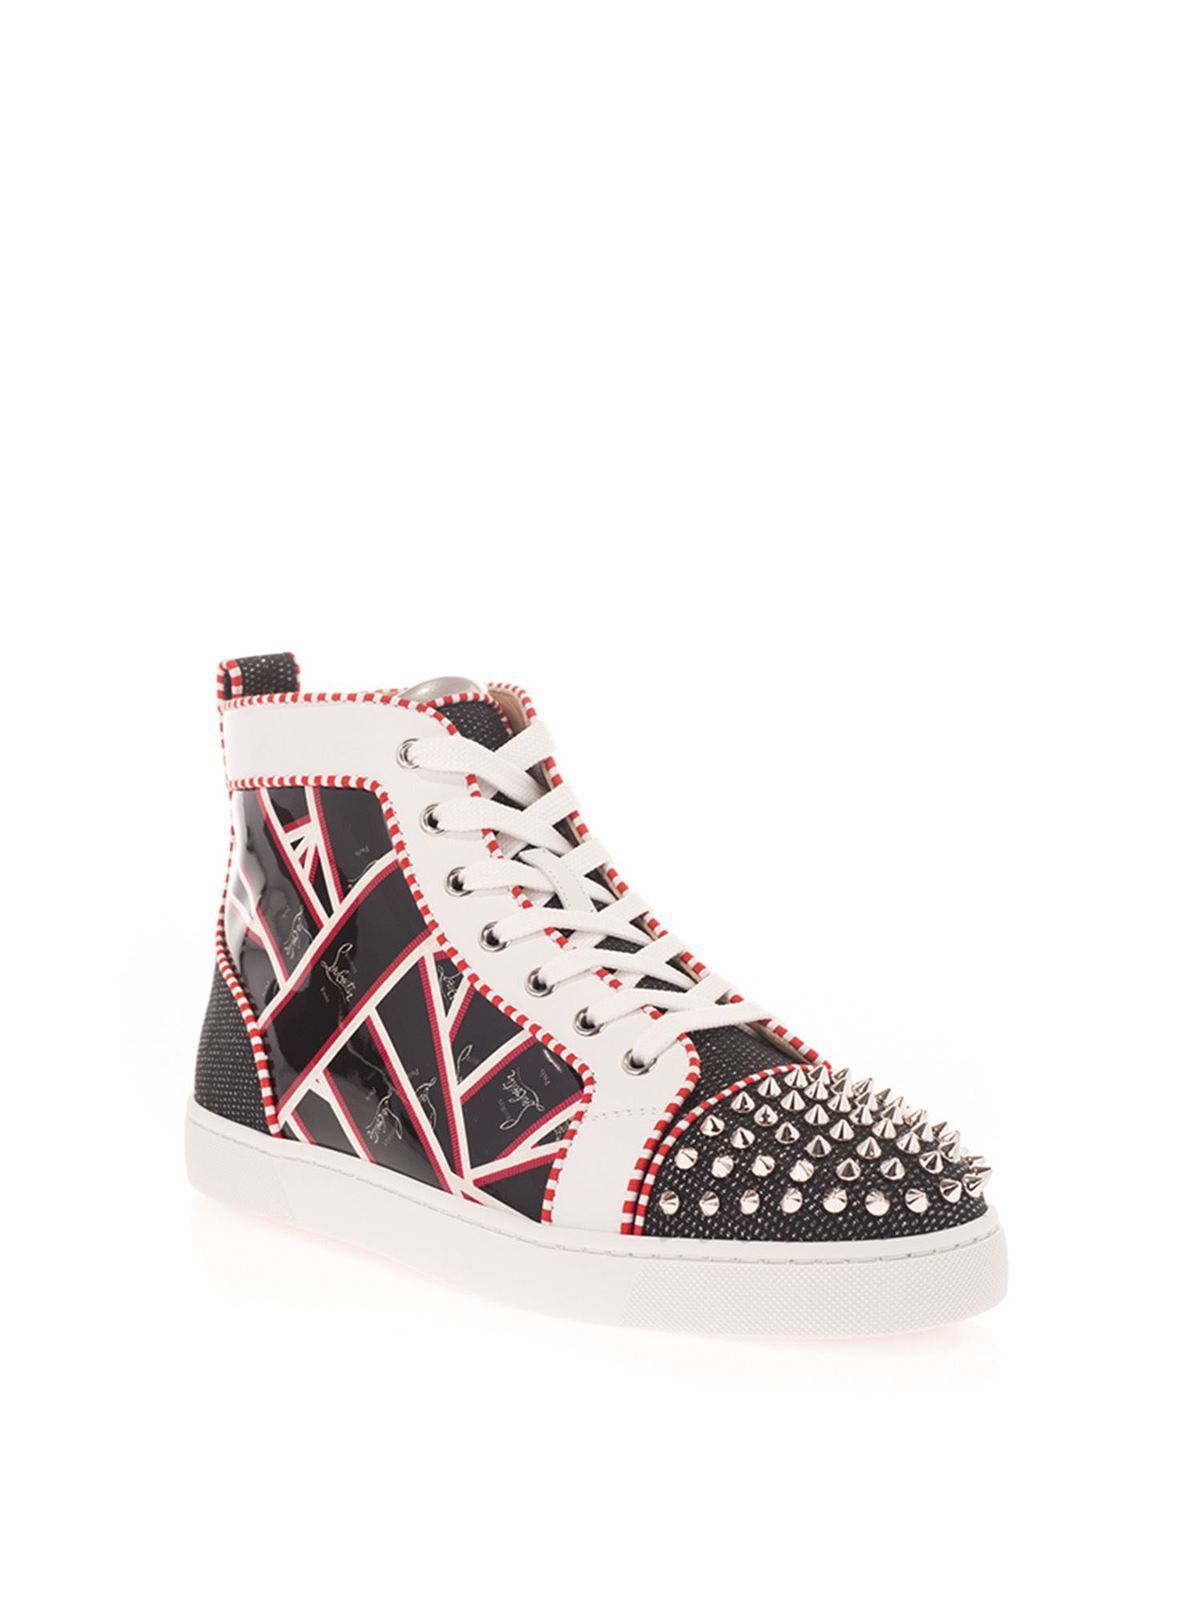 Christian Louboutin White Leather Multicolor Spikes Stud Size 39